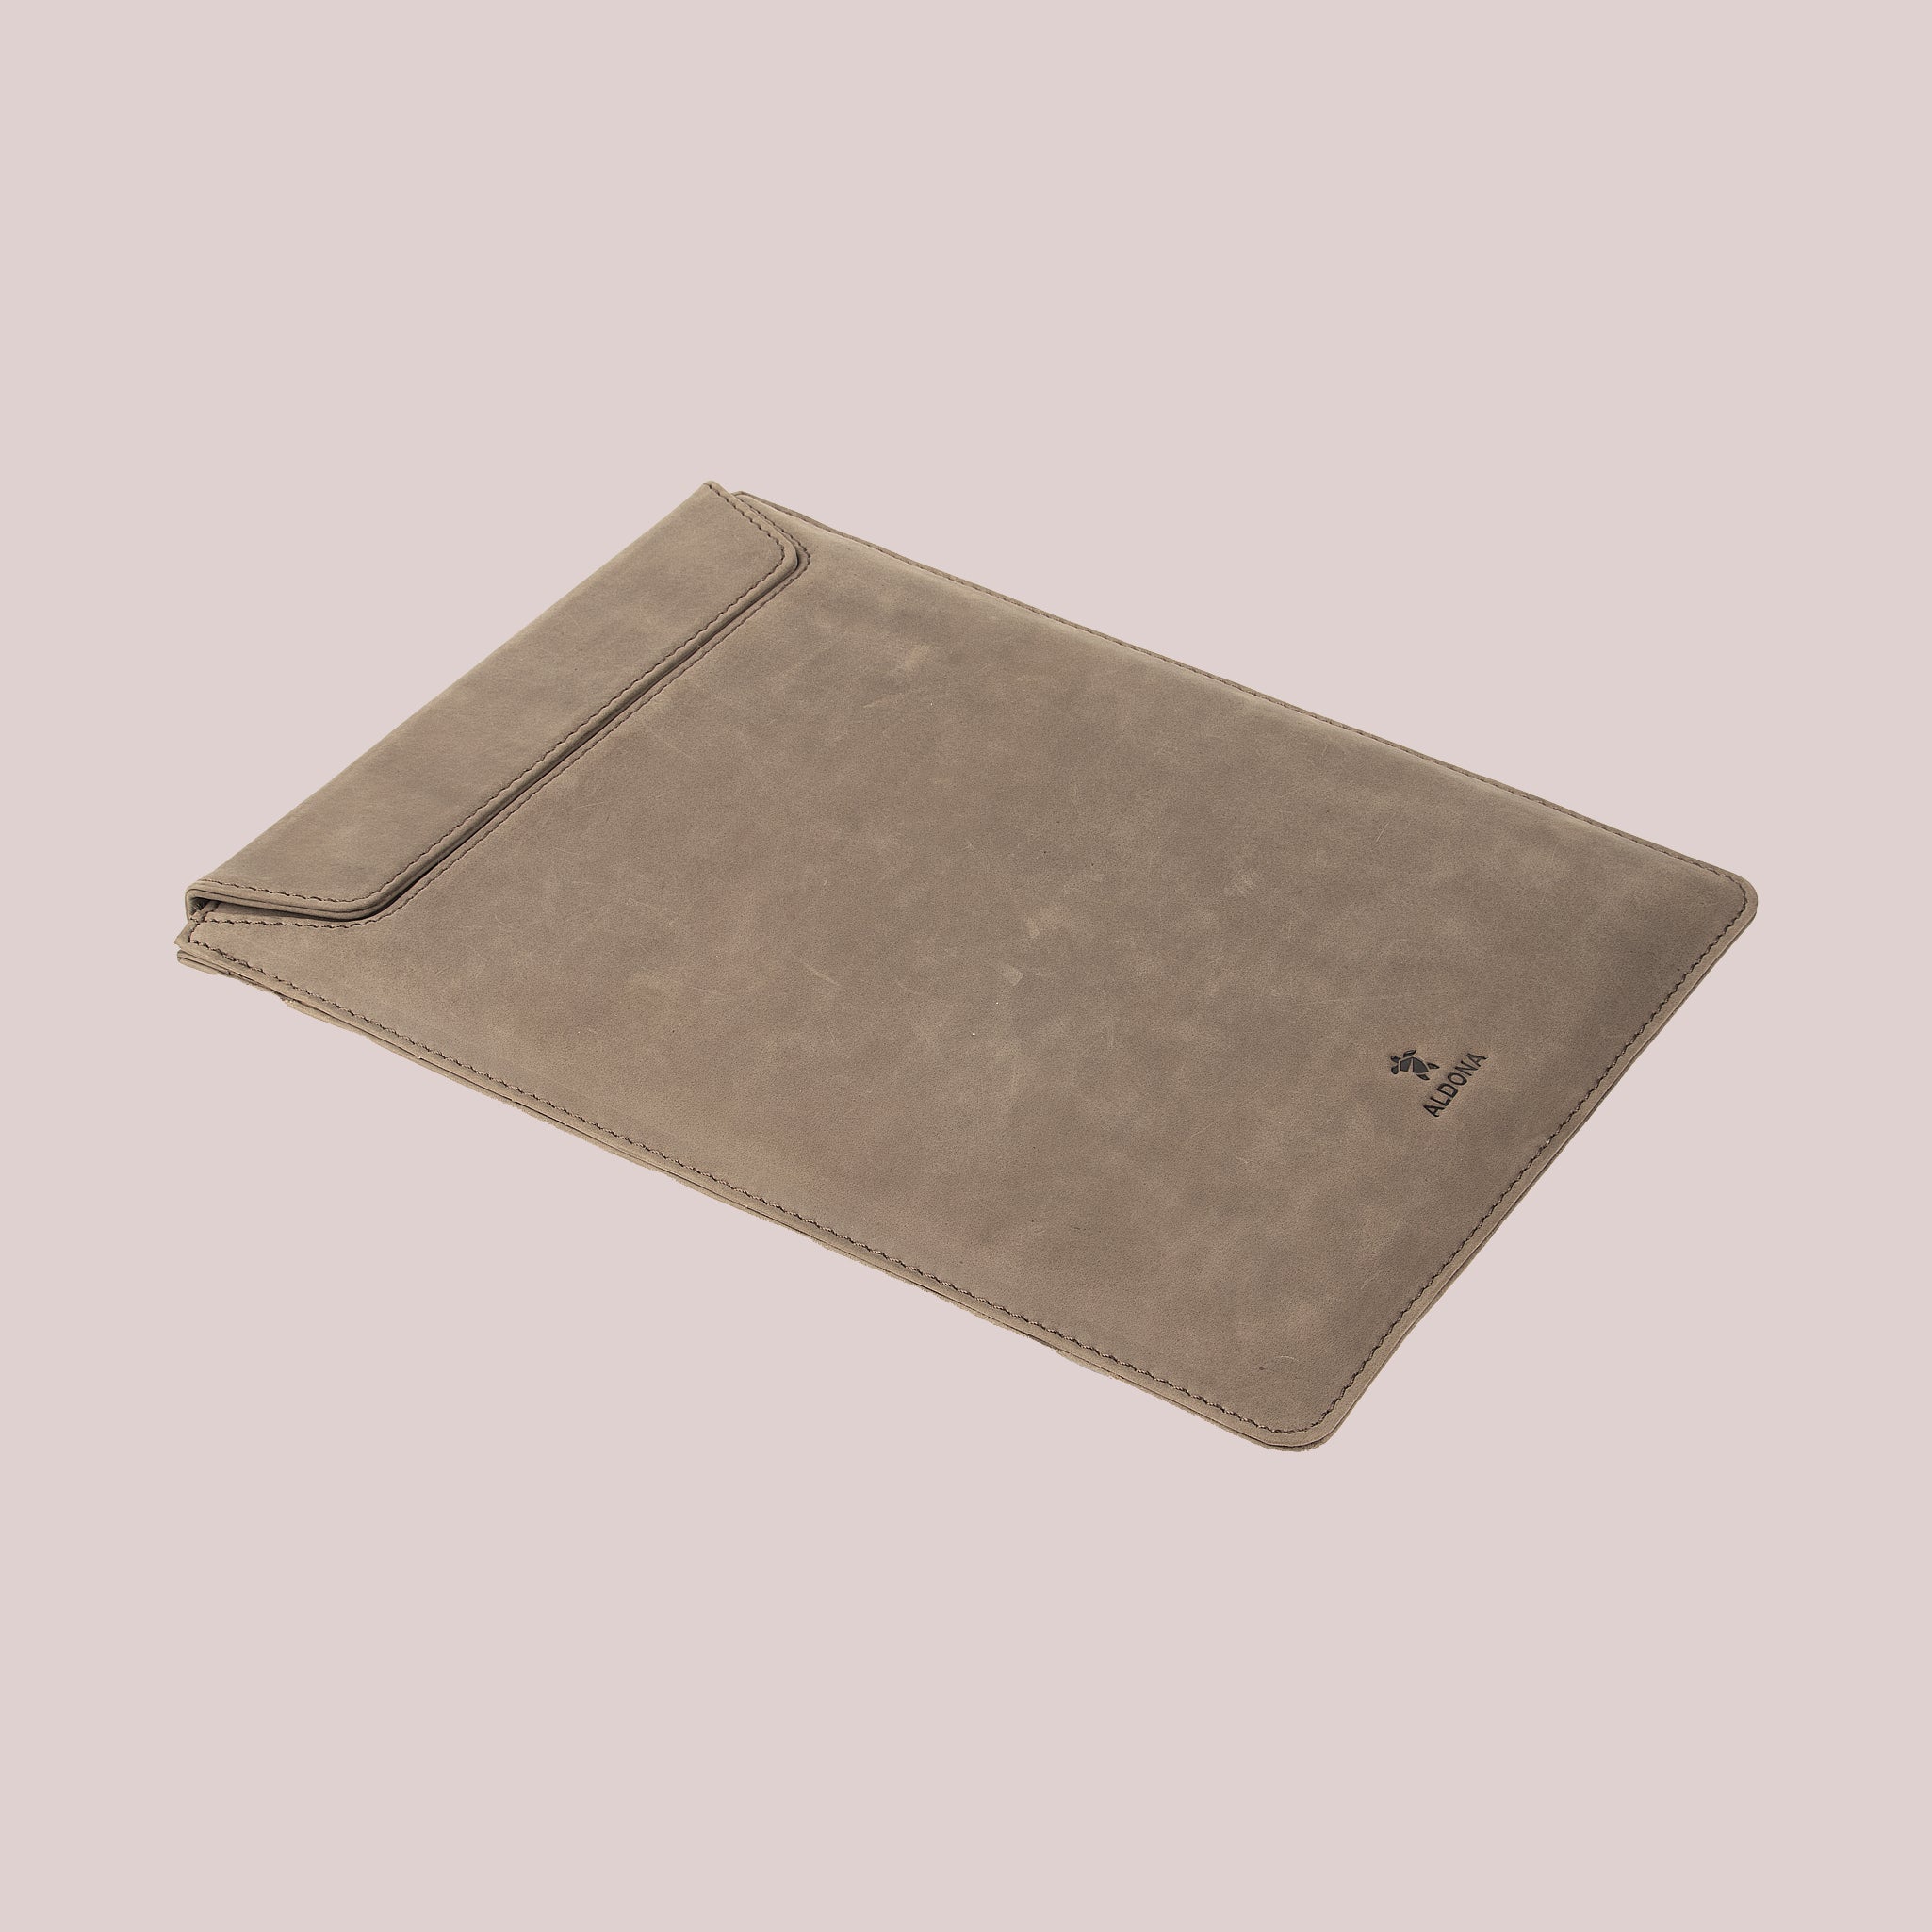 Buy online grey leather sleeve for Macbook laptops, with a flap